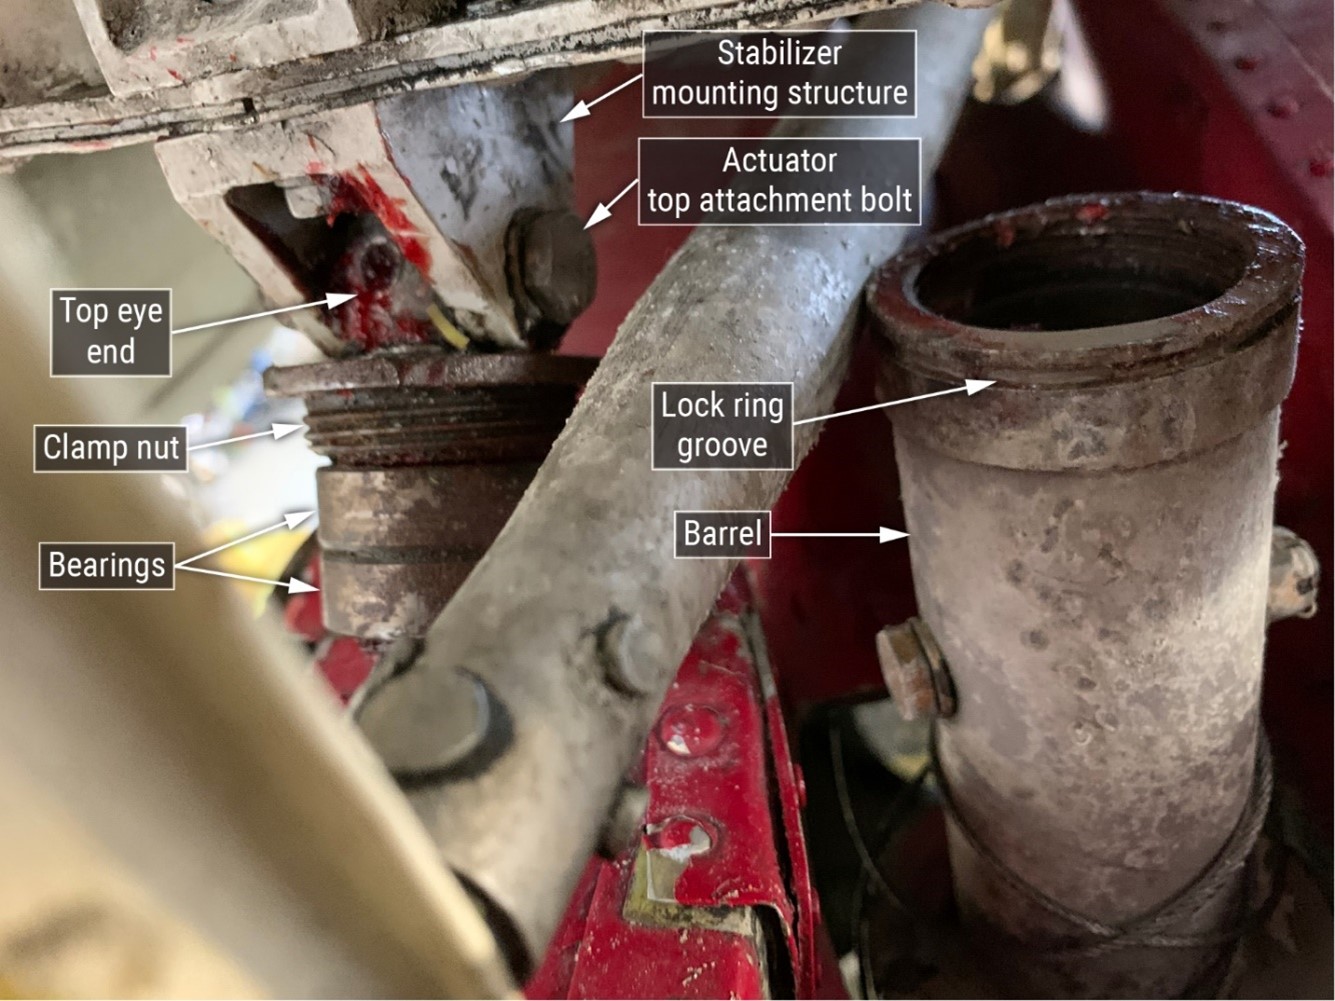 Clamp nut and barrel separation on accident airplane. 